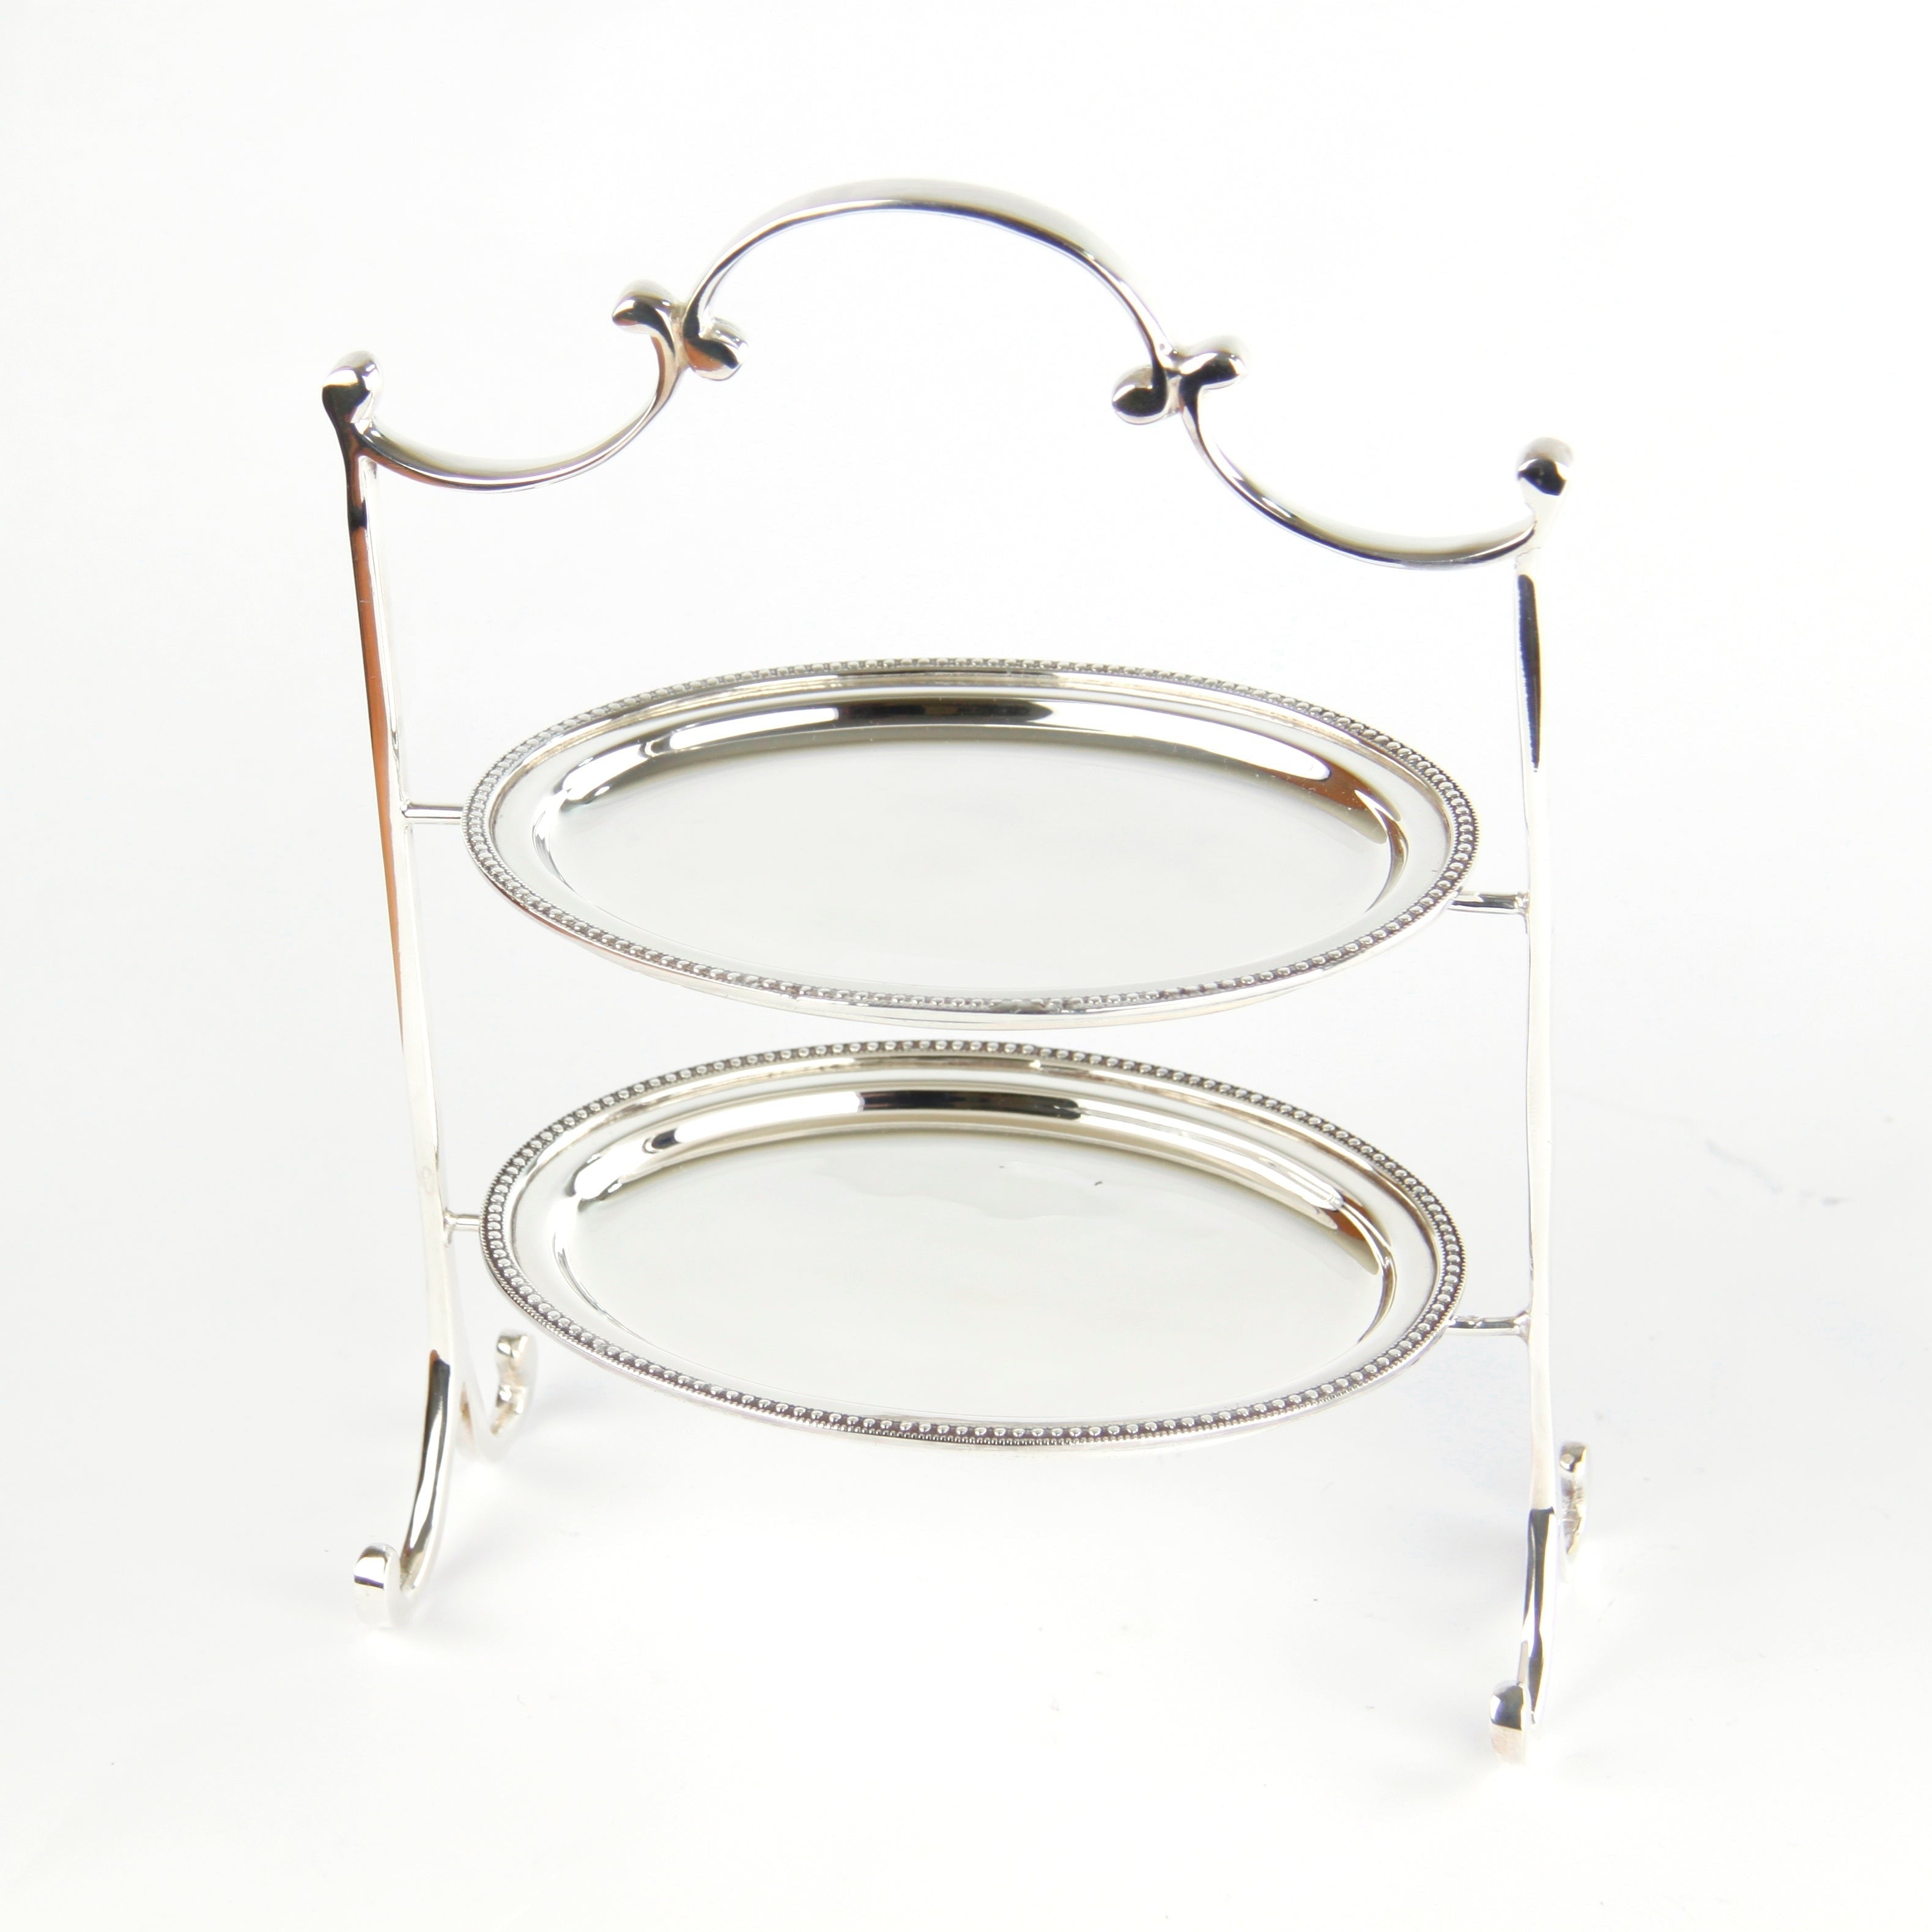 CAKE STAND WITH 2 STANDS 13*18 - LAZADO